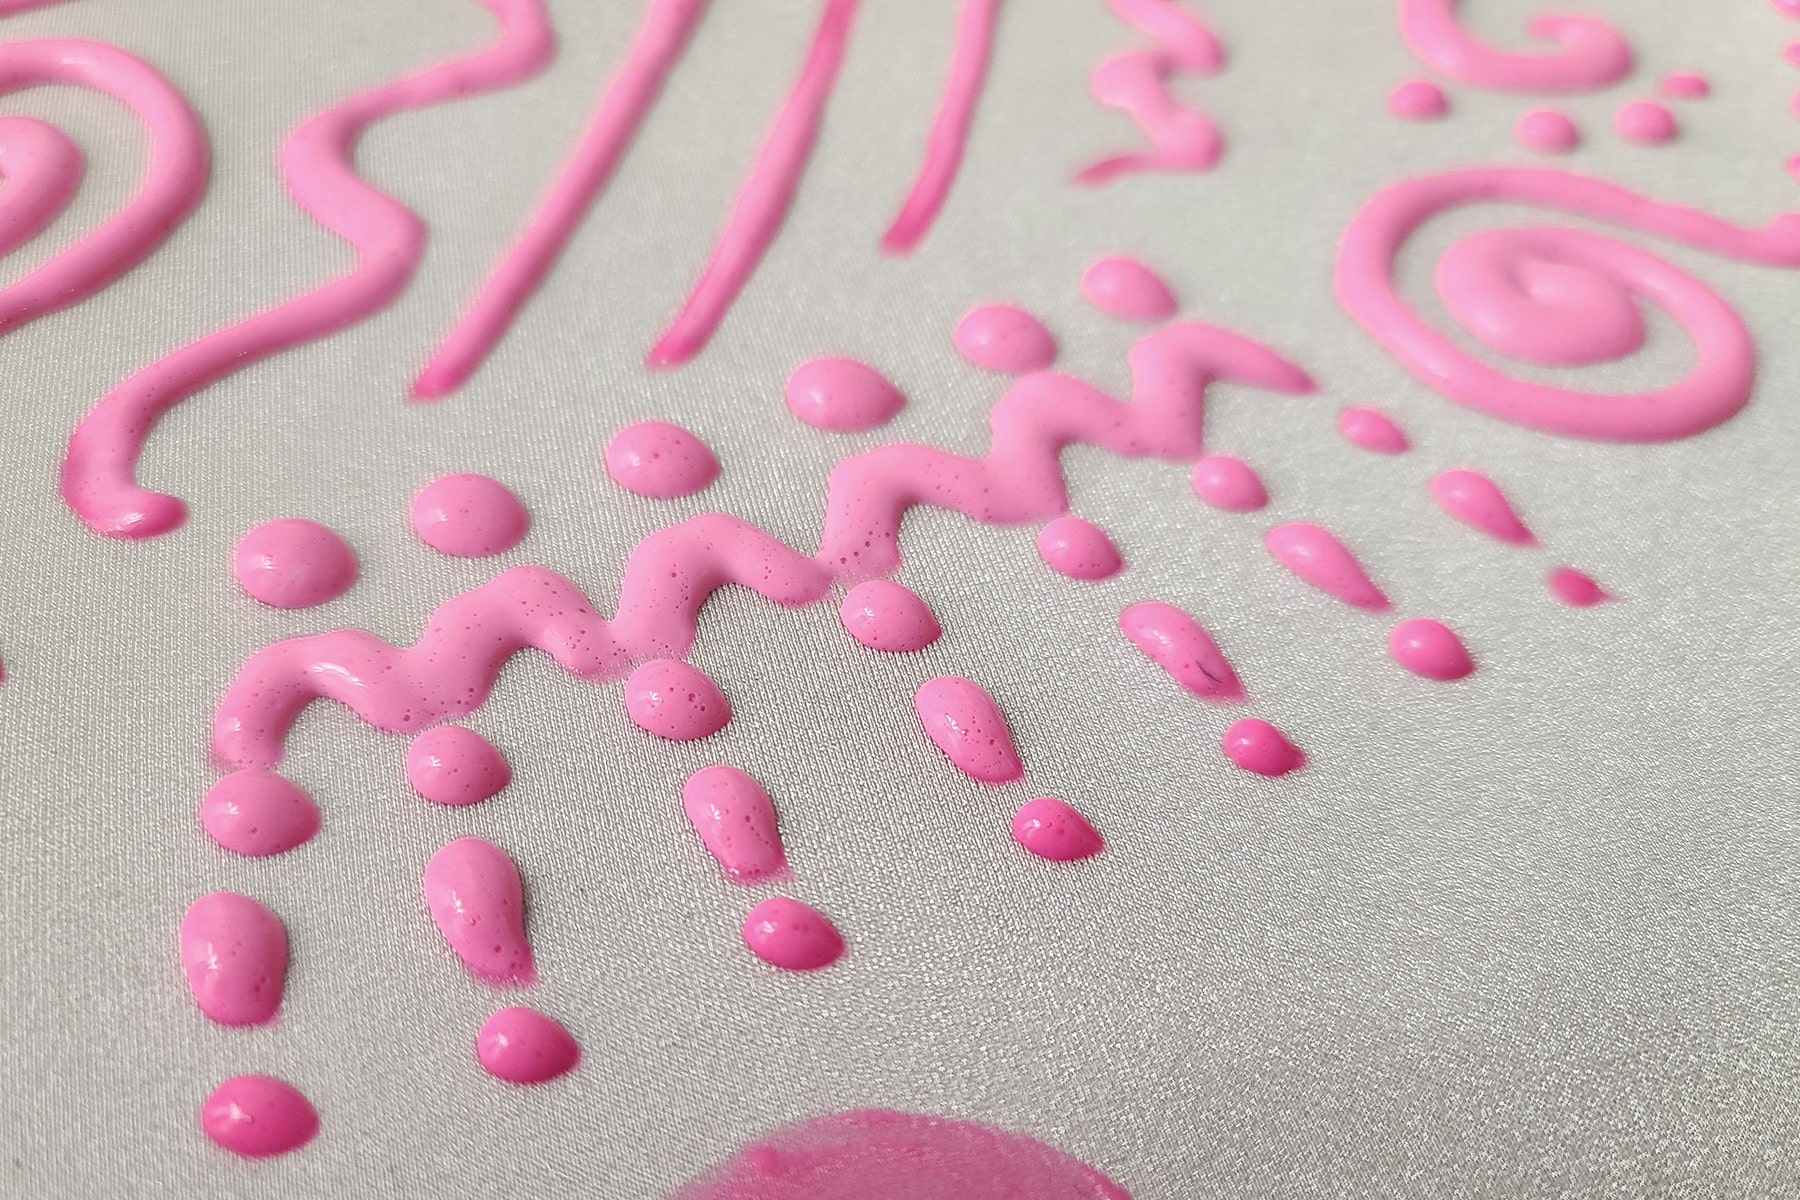 A close up view of some piped neon pink stretch paint. The paint in the foreground is partially dry, and darker than the rest of the paint.